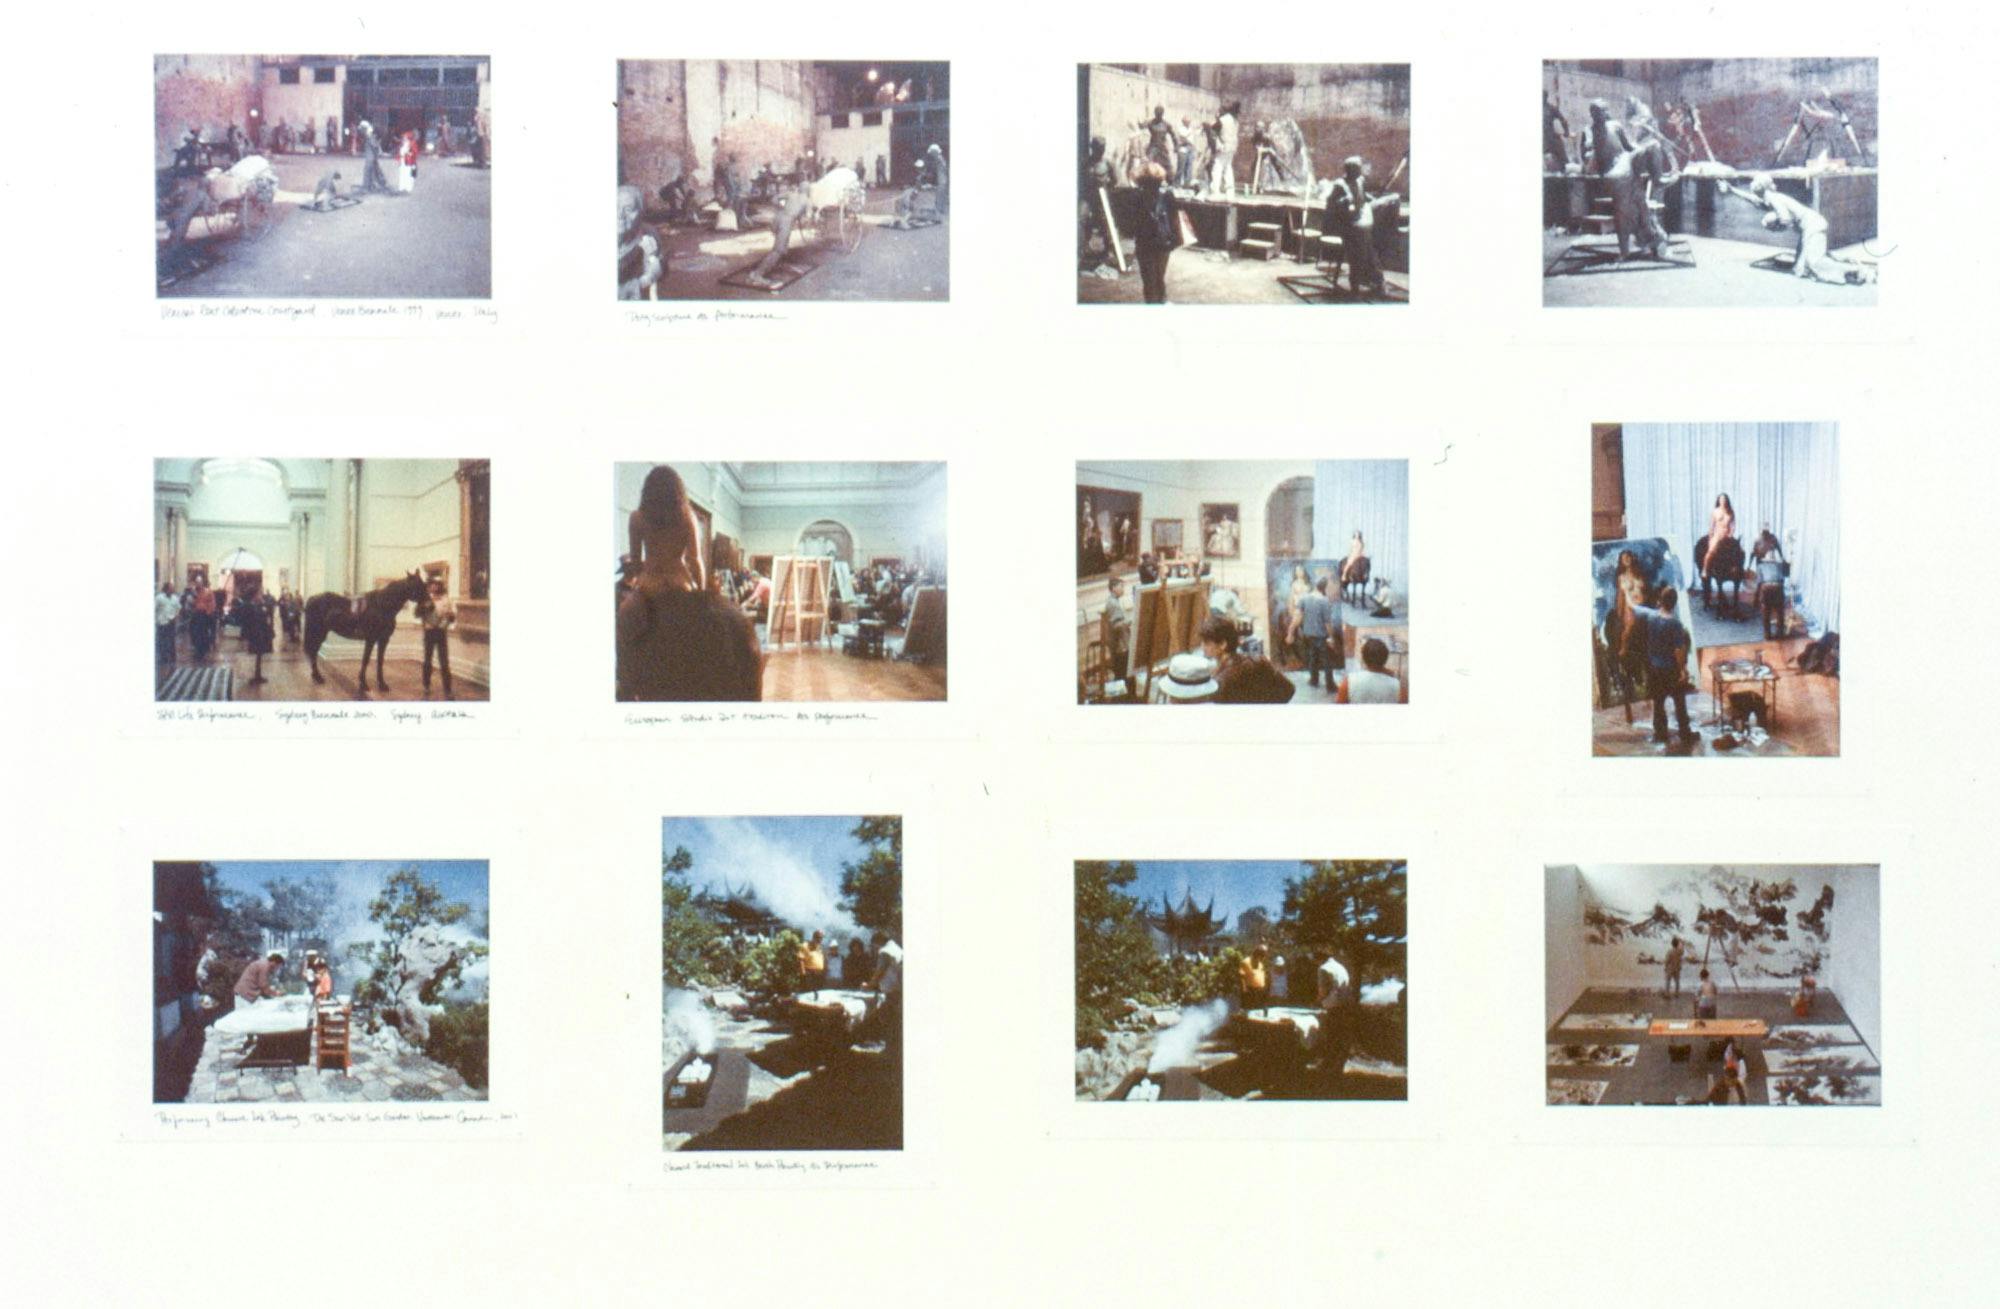 Twelve coloured photographs are assembled on a sheet of white paper. They record different art practices that took place at different locations and times. Some photos were taken outside.